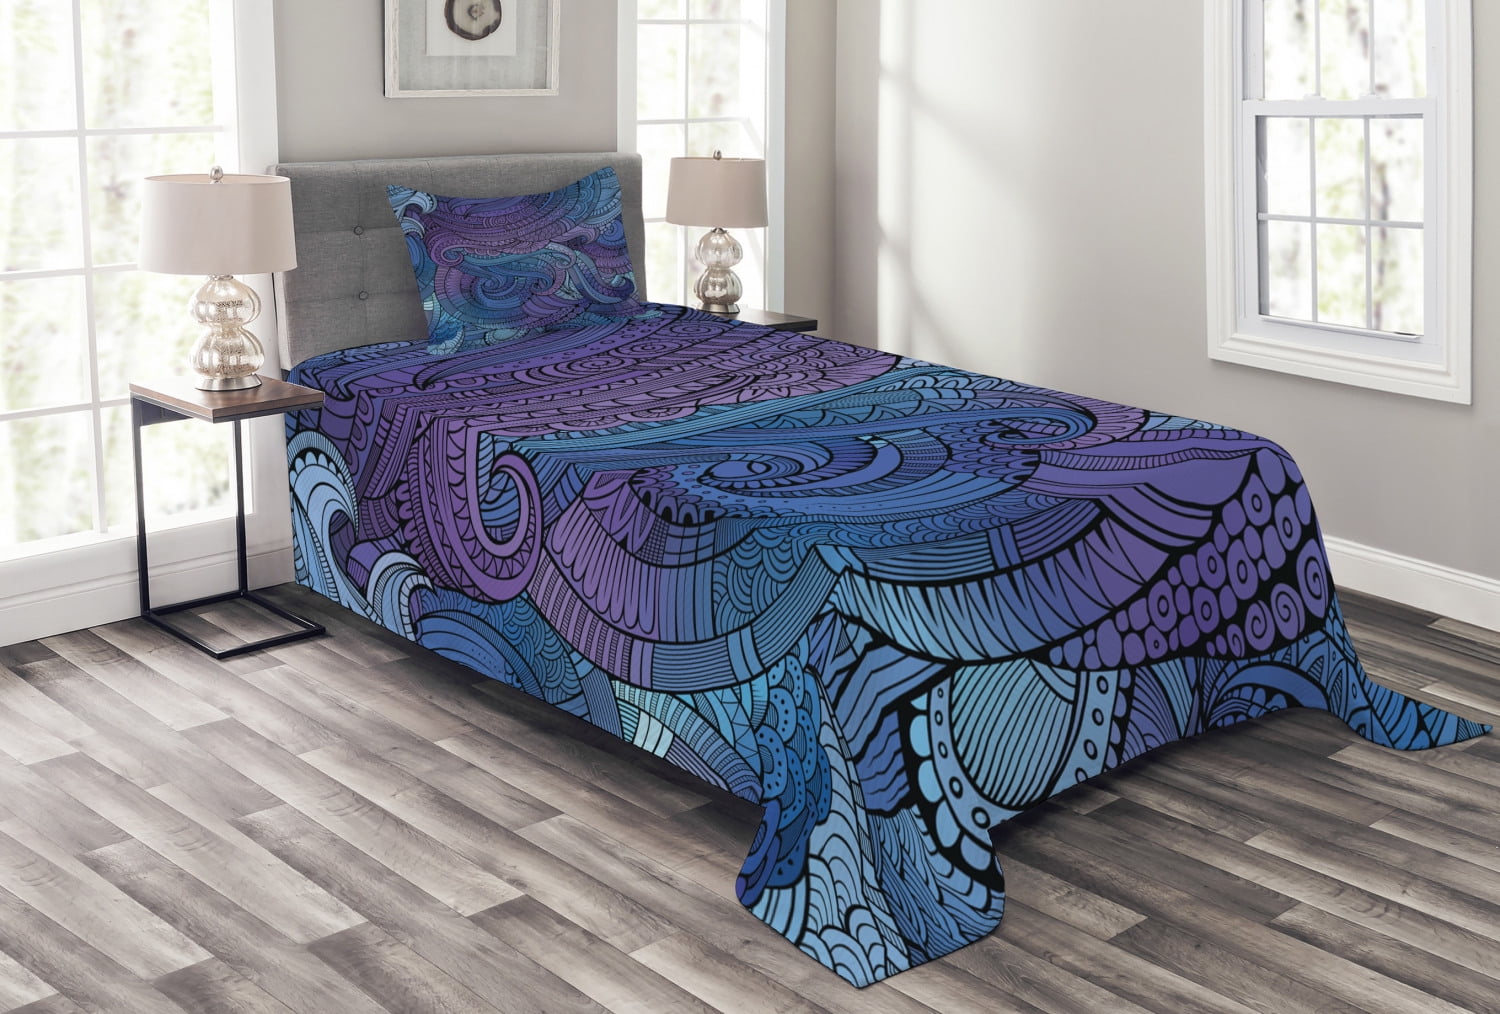 Abstract Bedspread Set Twin Size, Ocean Inspired Graphic Arabesque Paisley  Swirled Hand Drawn Ethnic Artwork Print, Quilted Piece Decor Coverlet Set  with Pillow Sham, Purple Blue, by Ambesonne